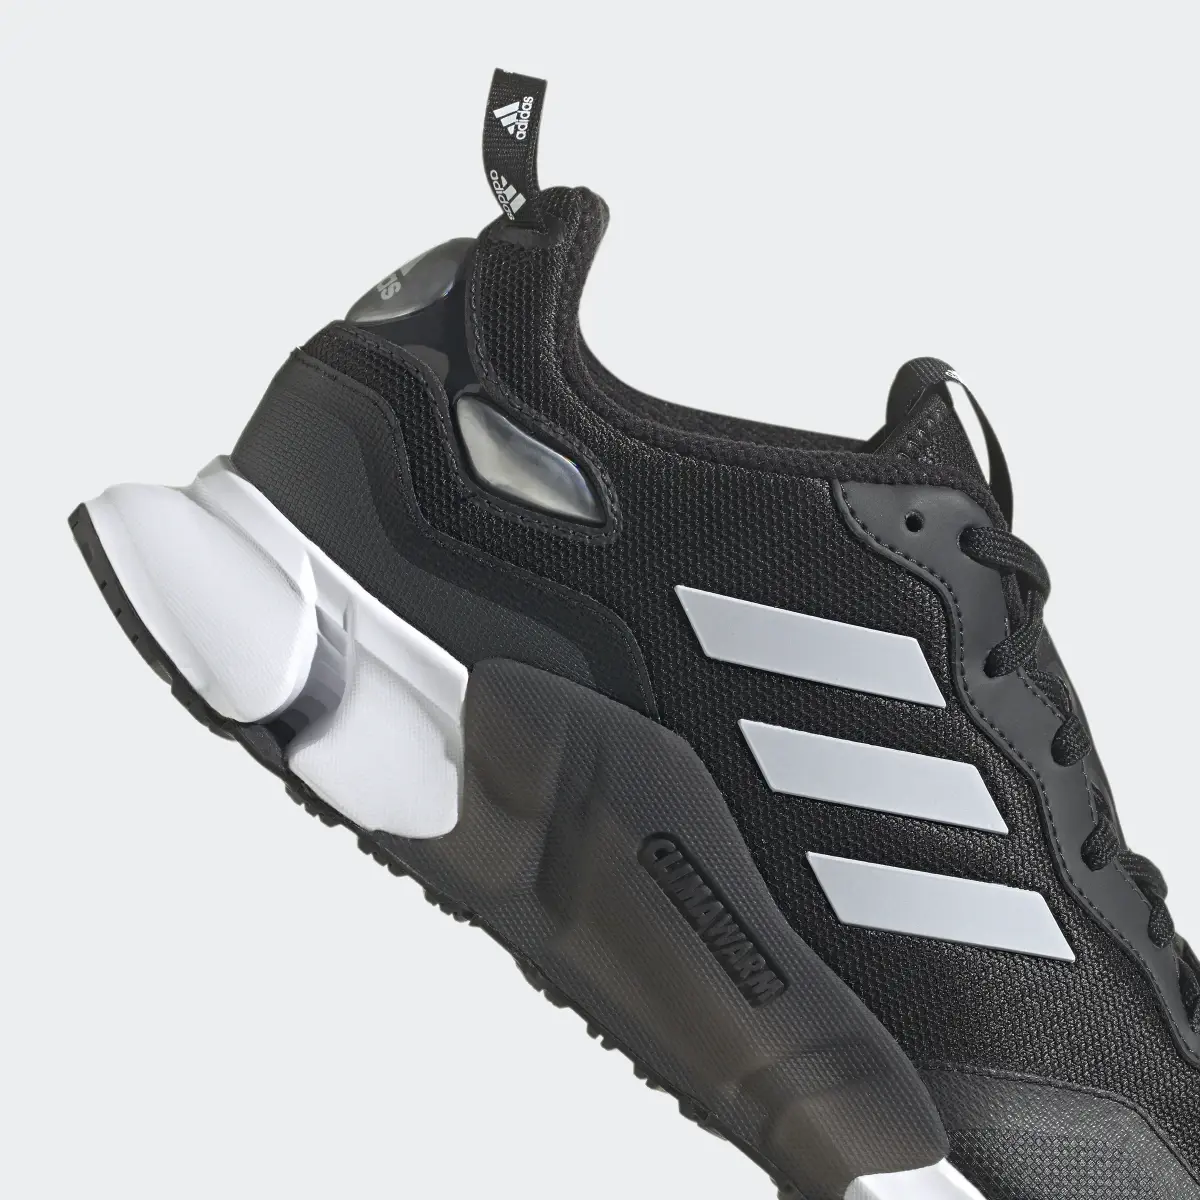 Adidas Climawarm Shoes. 3